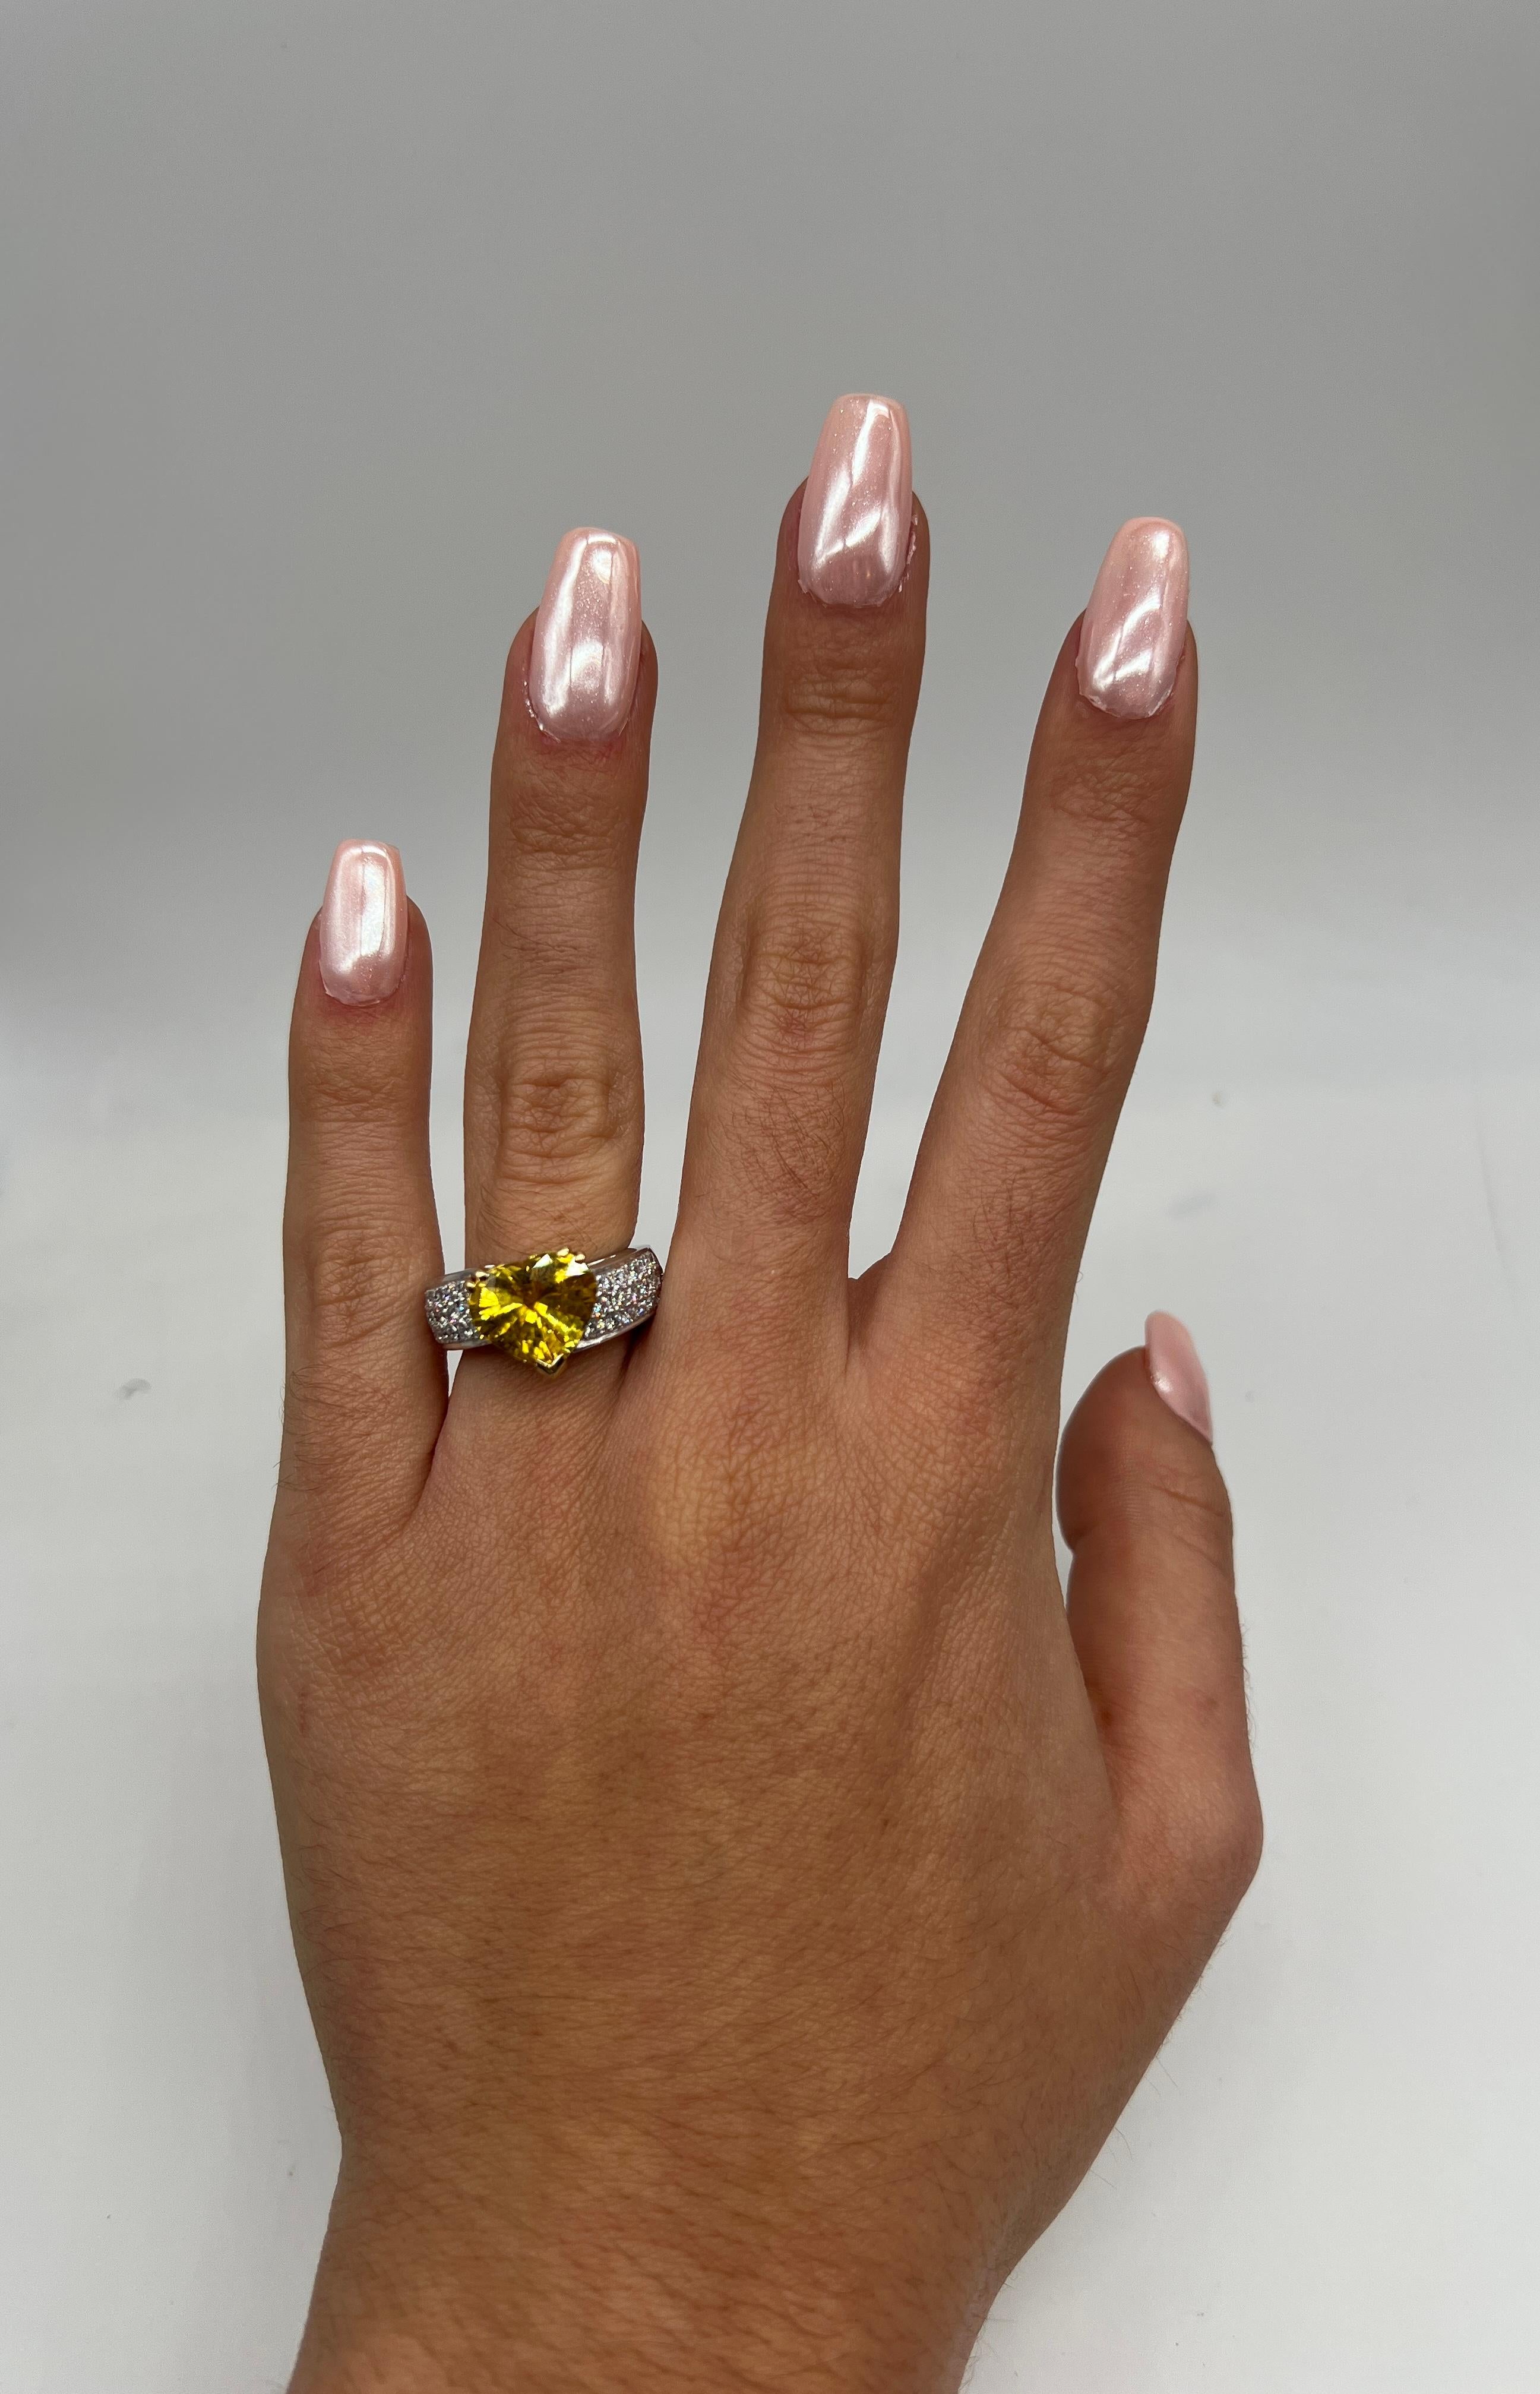 French Ring, Yellow Sapphire Heart, Pavage Diamonds 2